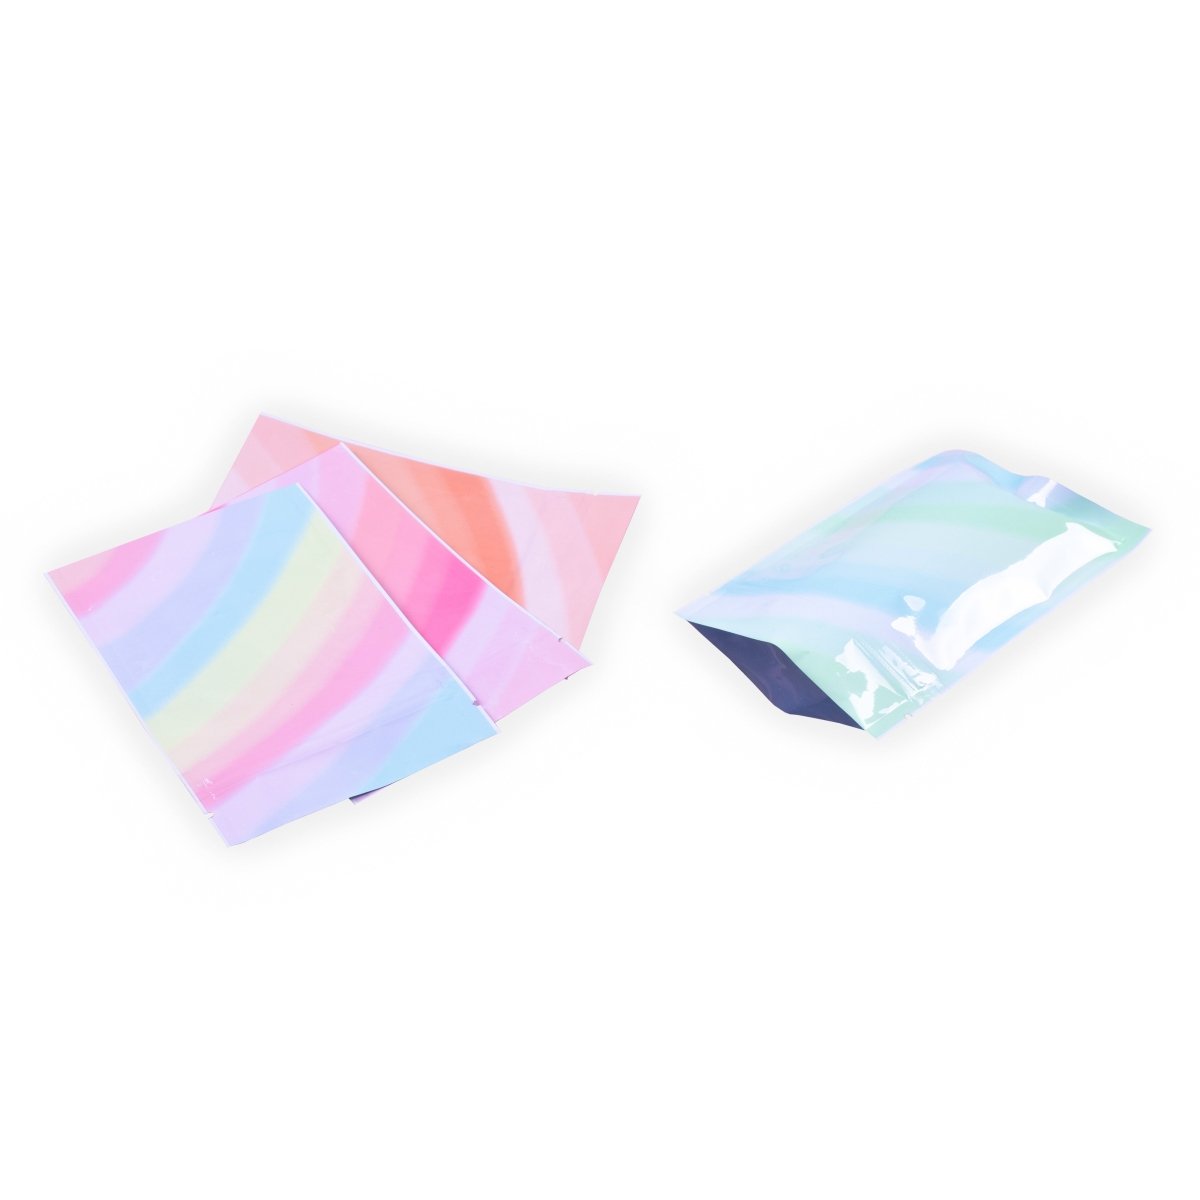 Glossy Double-Sided Multi-Color Ombre Gradient Mylar Bags - Katady packaging